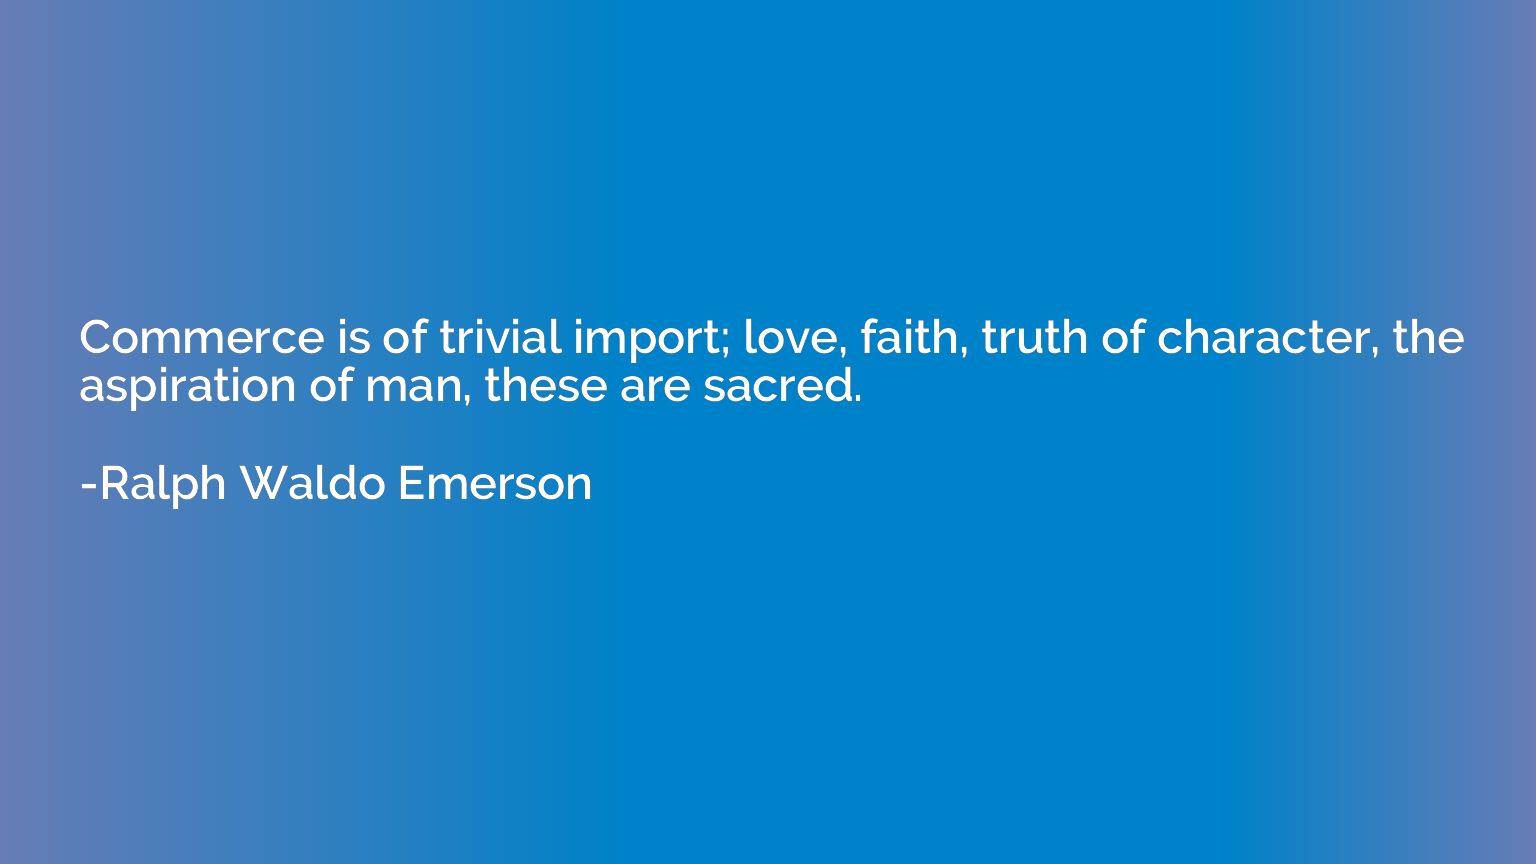 Commerce is of trivial import; love, faith, truth of charact